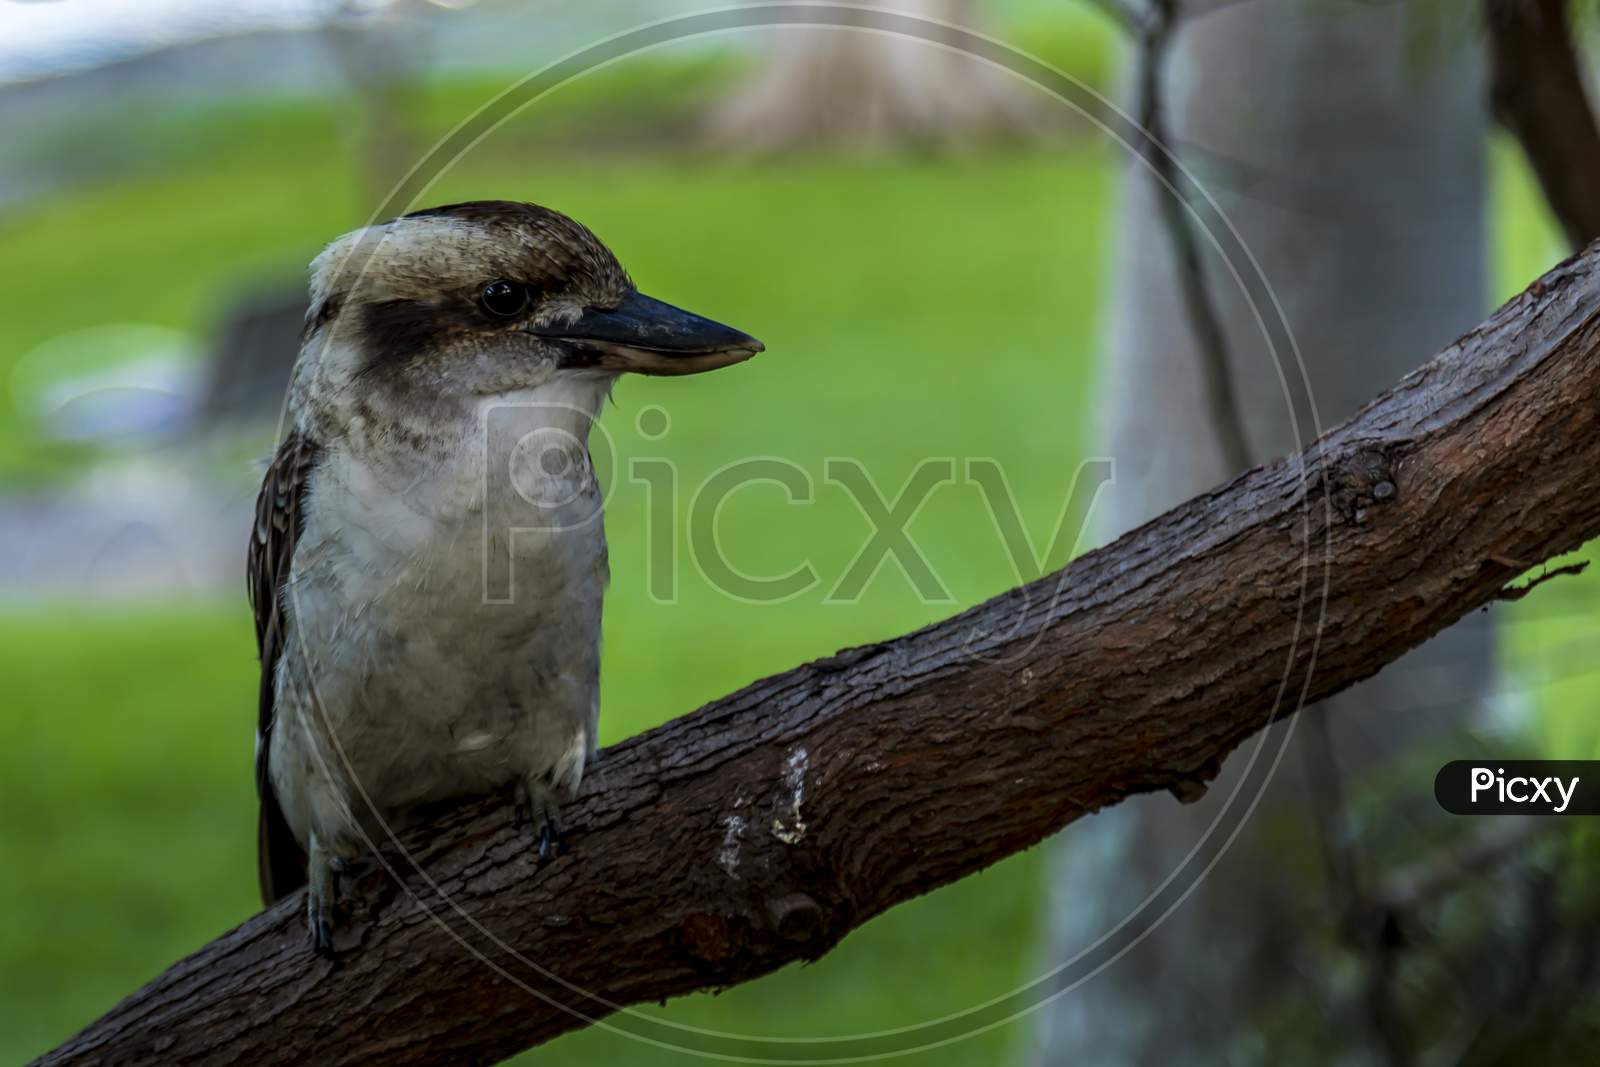 A kookaburra - one of the most popular birds of Australia - sitting on a branch of a tree in a public park in Sydney, New South Wales during a hot day in summer.